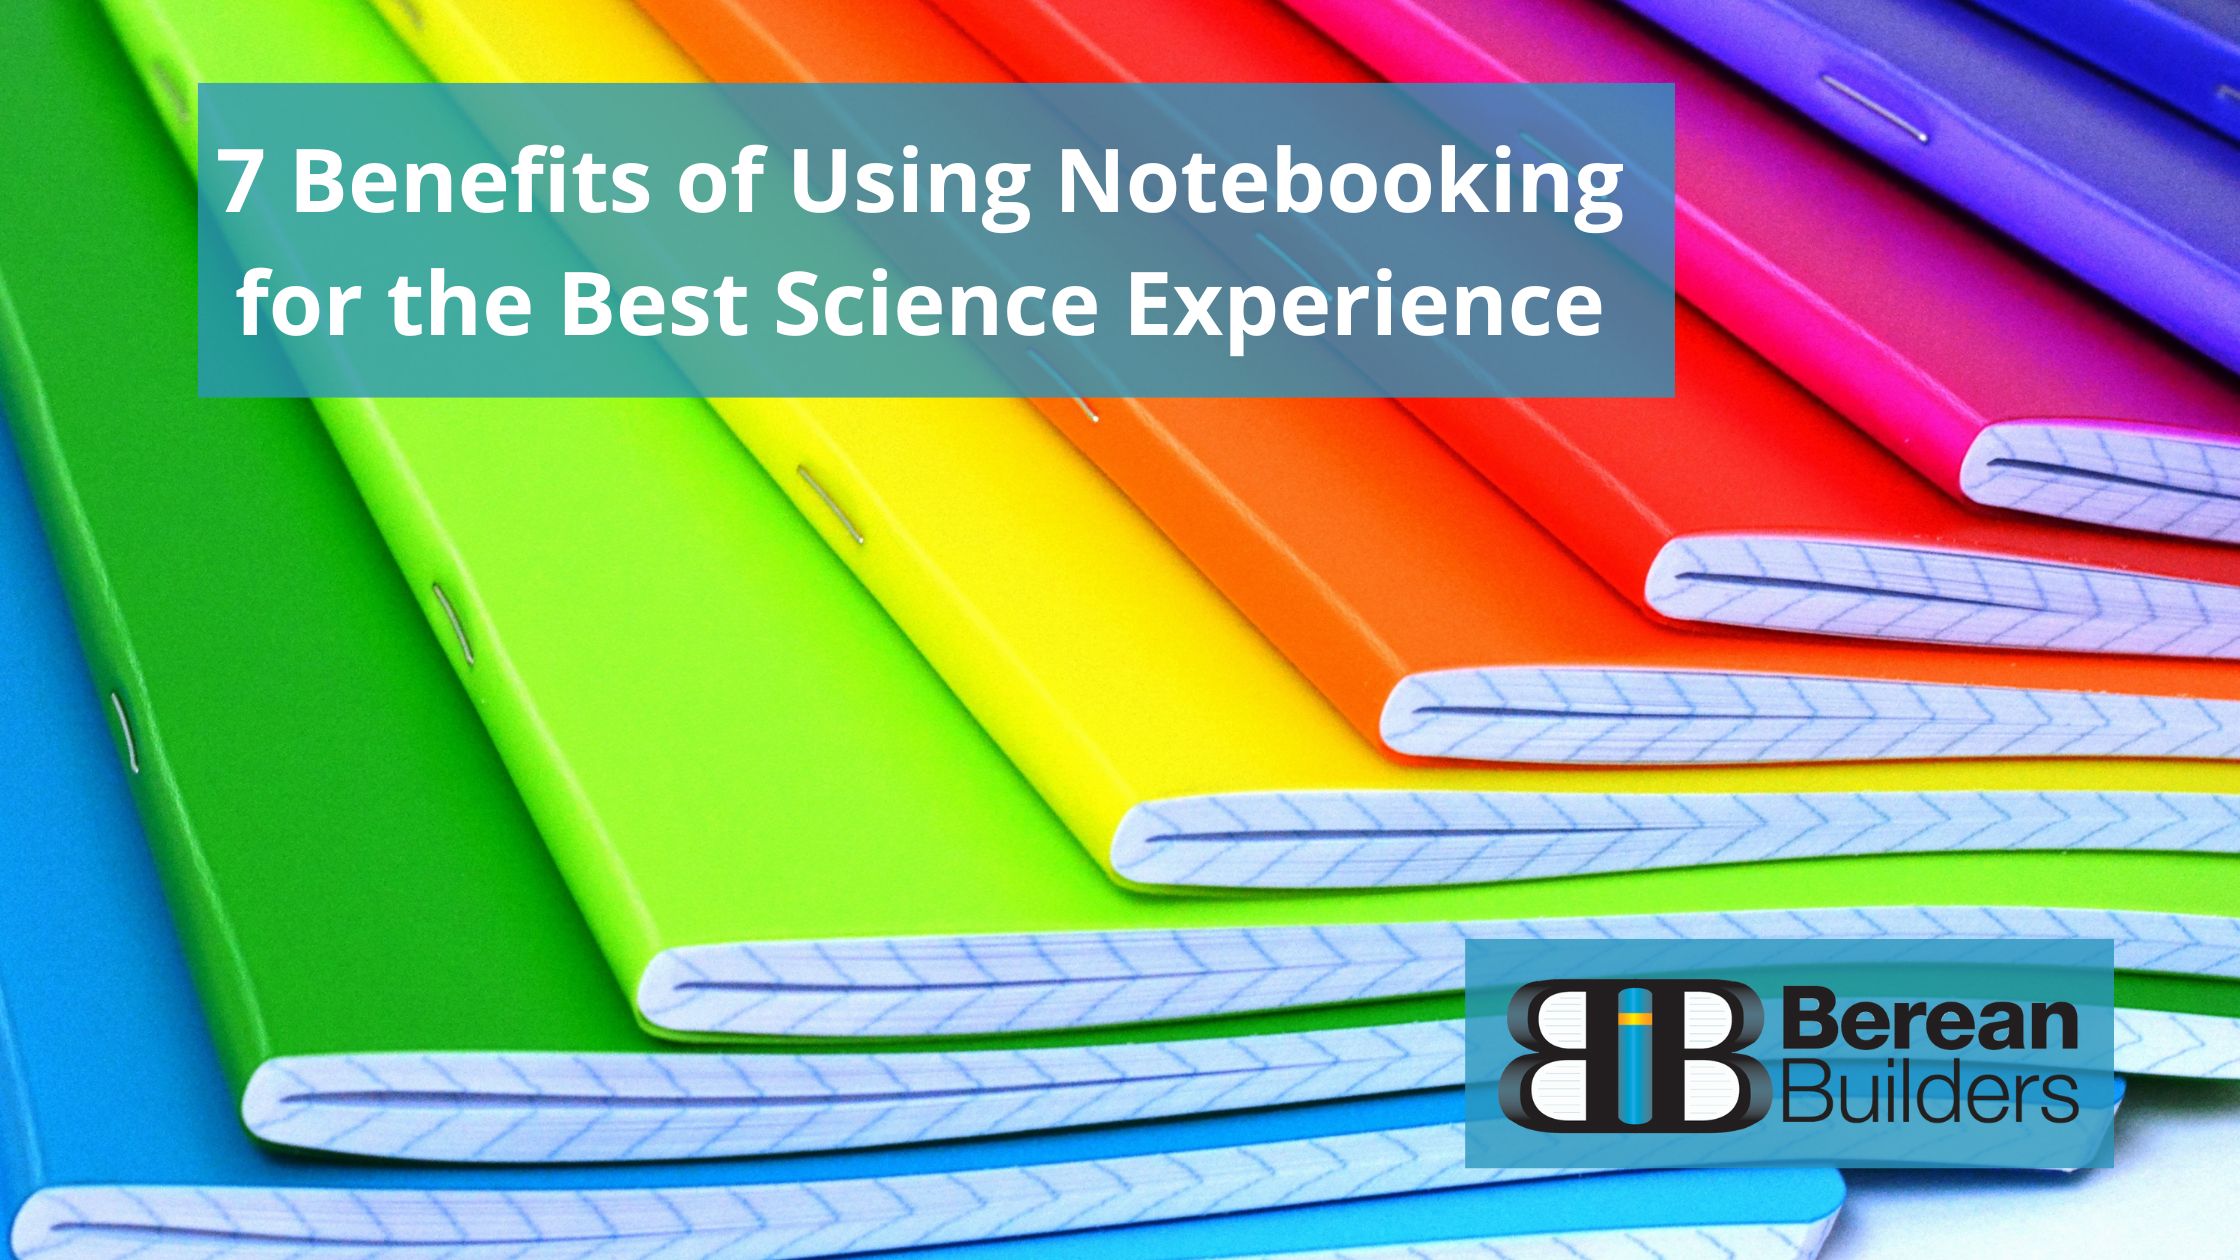 7 Benefits of Using notebooking for the best science experience